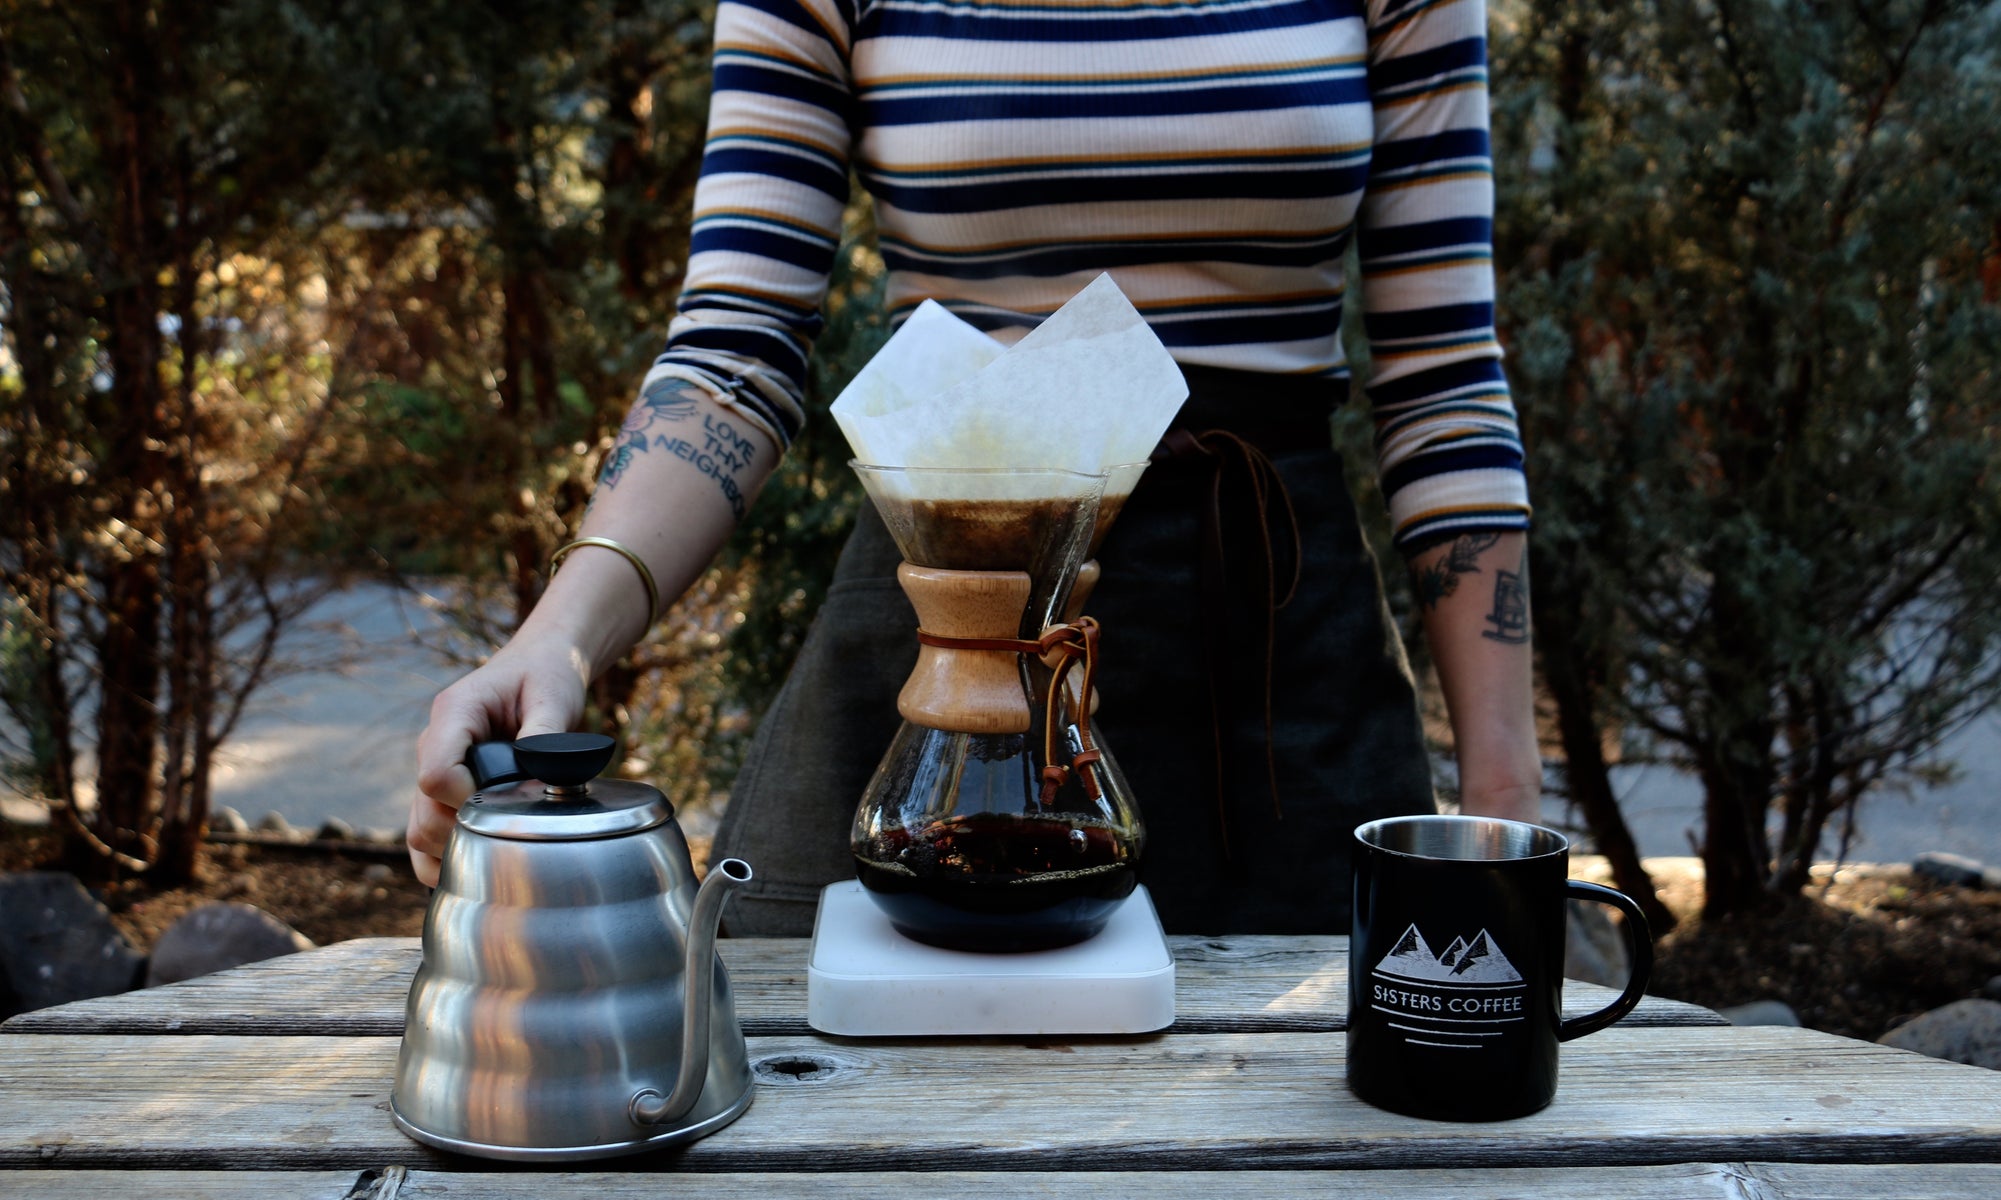 How to Make Pour Over Coffee Chemex: A Comprehensive Guide